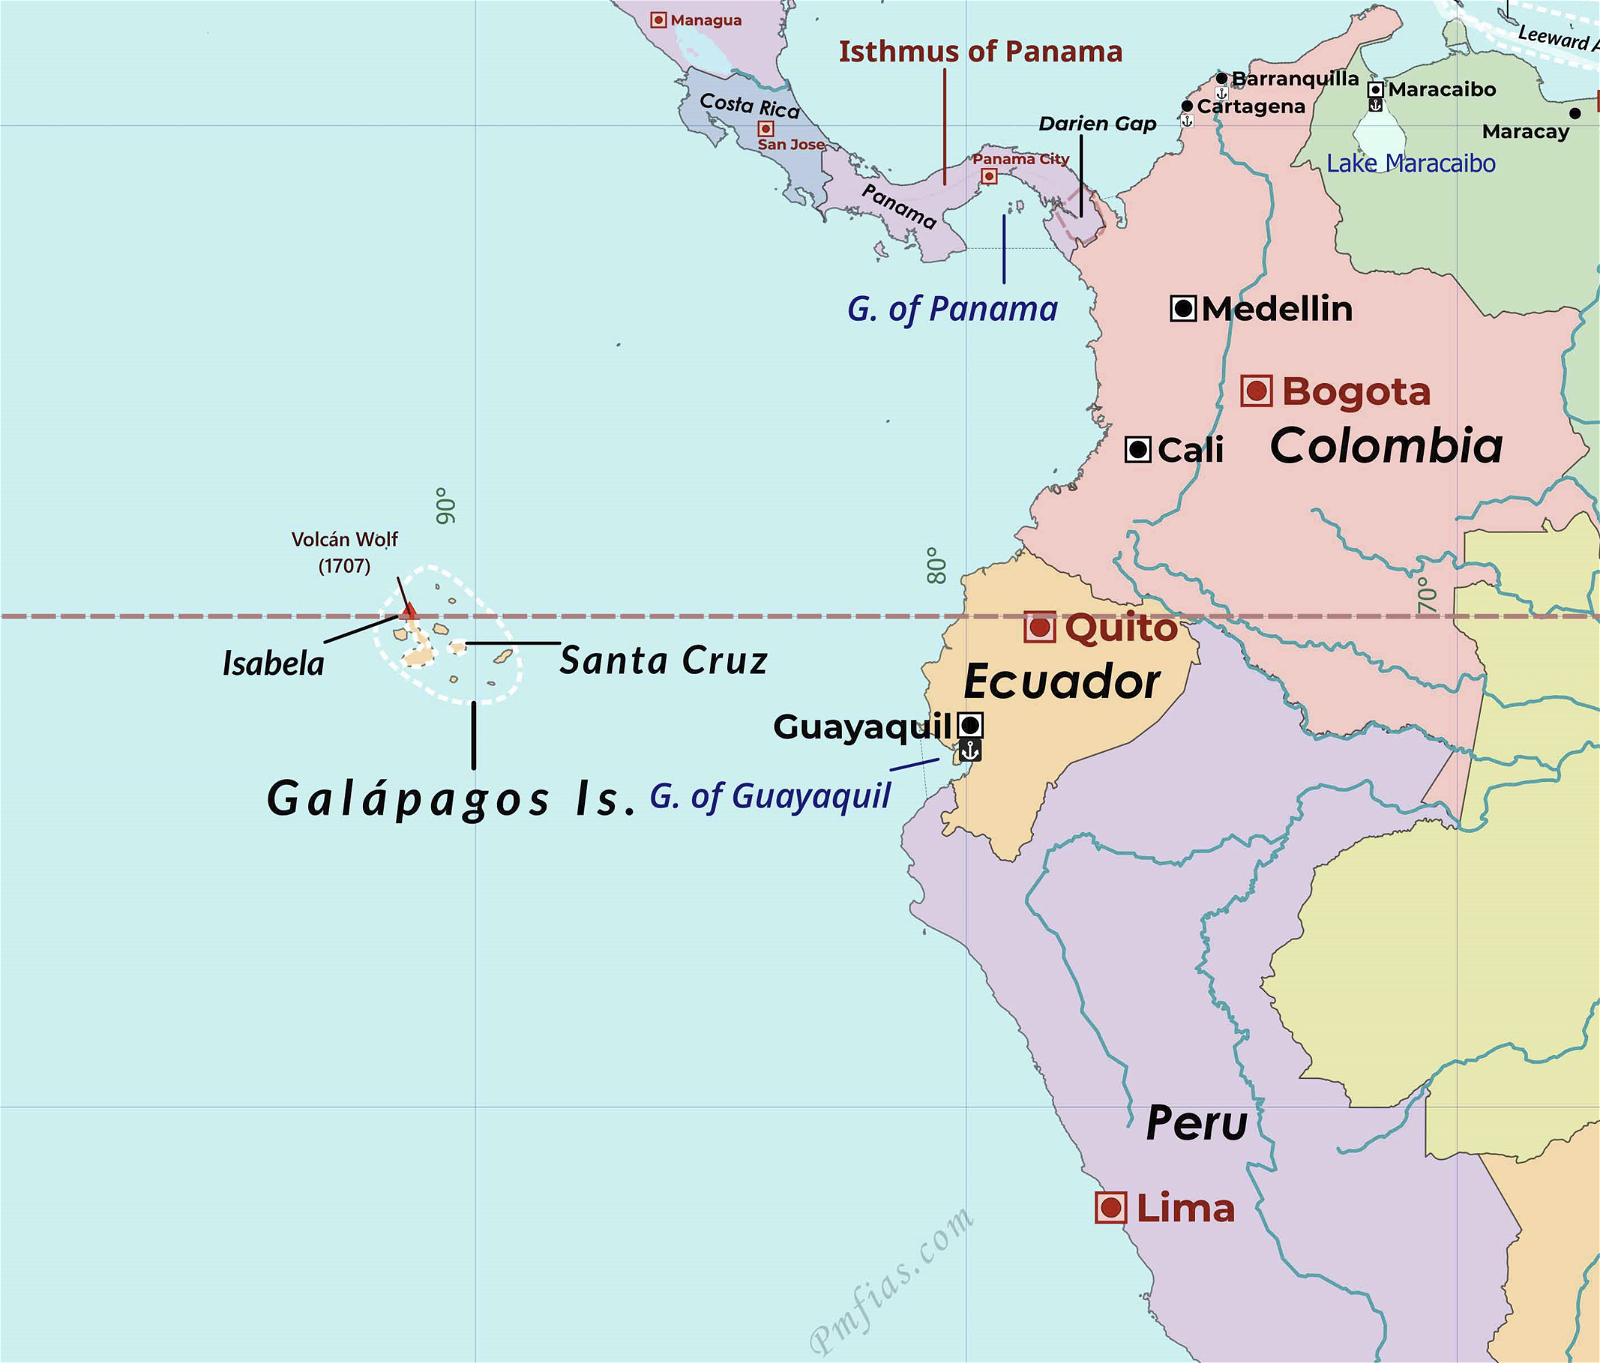 Countries and Physiographic Regions bordering Ecuador 